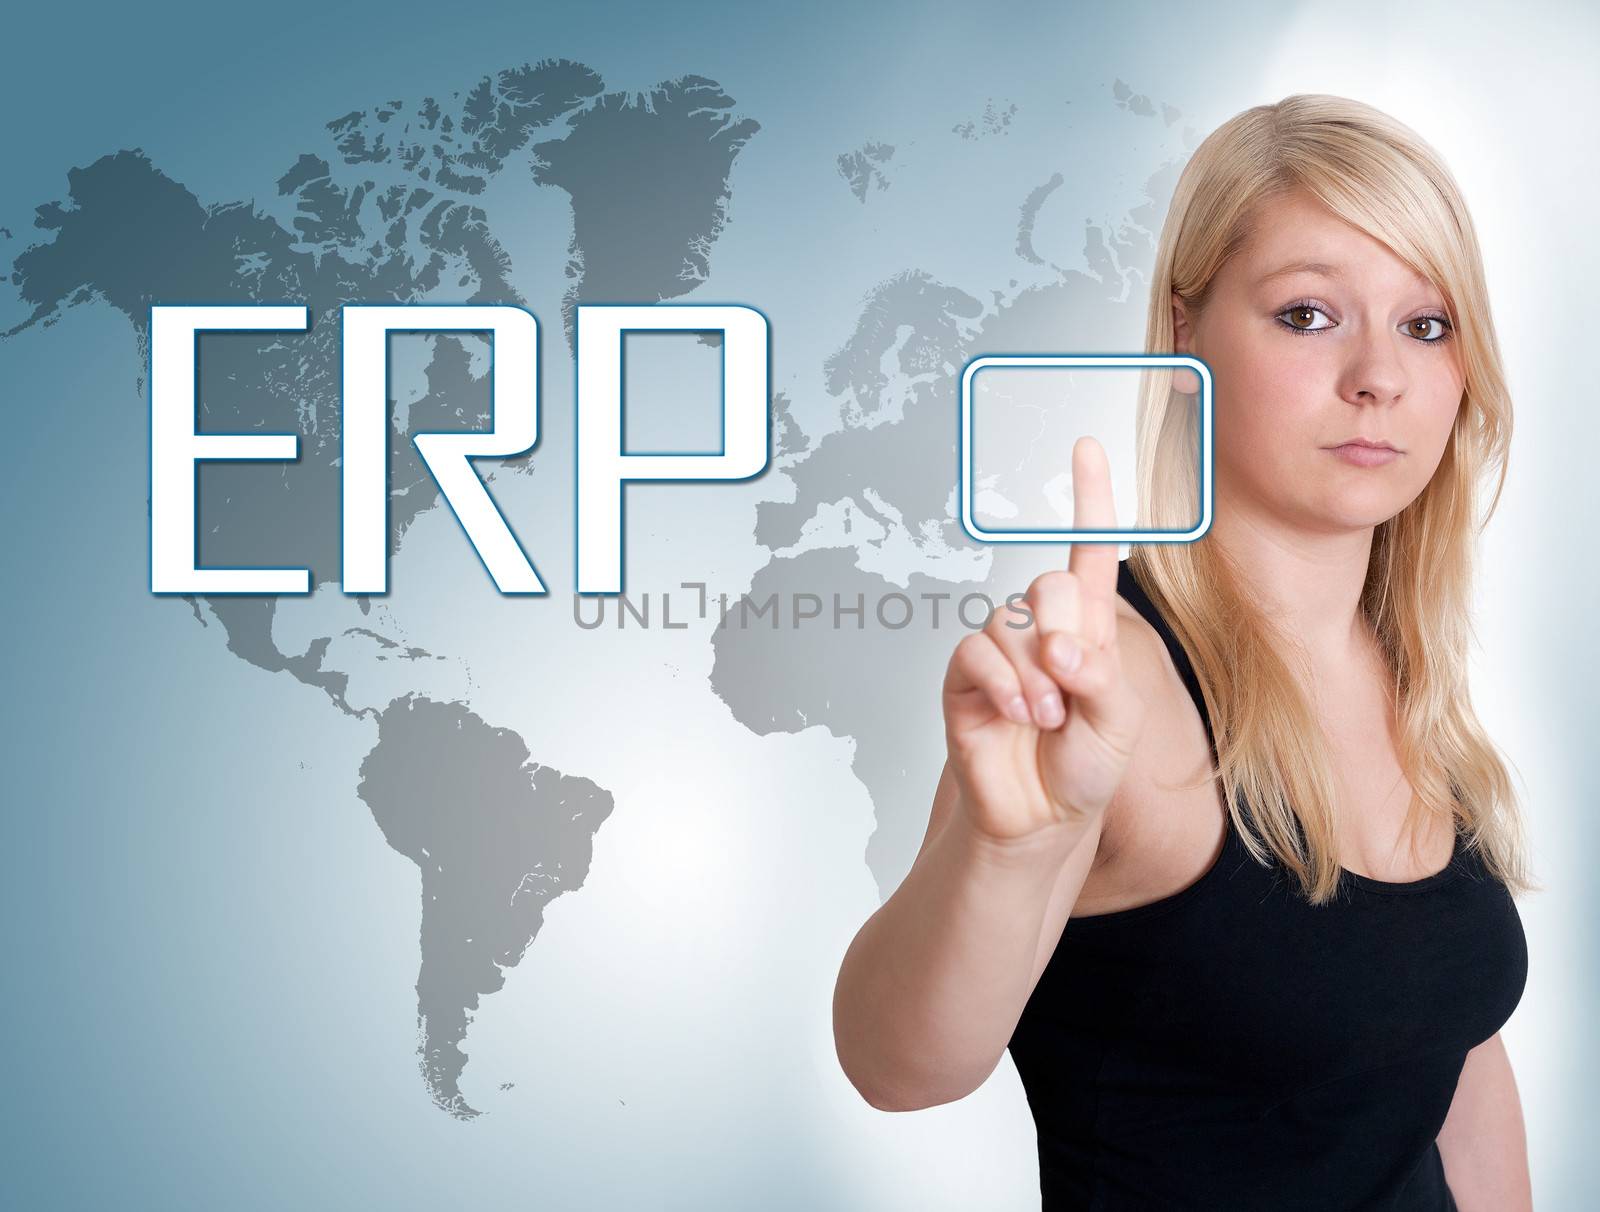 Young woman press digital Enterprise Resource Planning button on interface in front of her